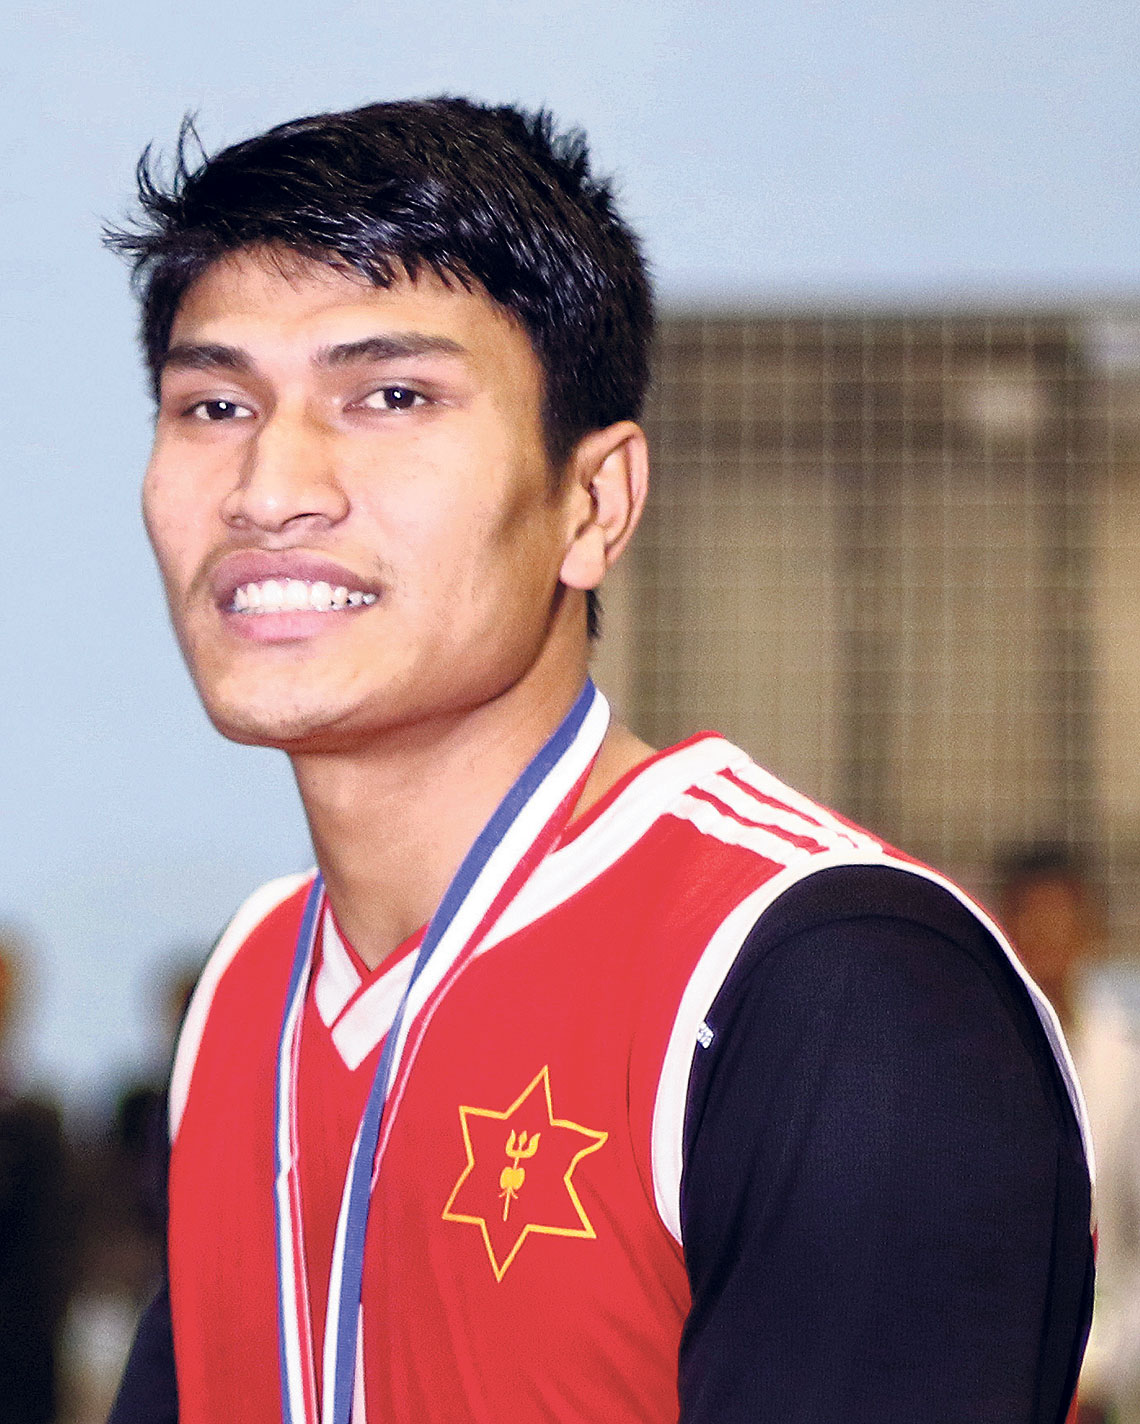 Volleyball prodigy Shrestha’s increased stakes in People’s Choice Award